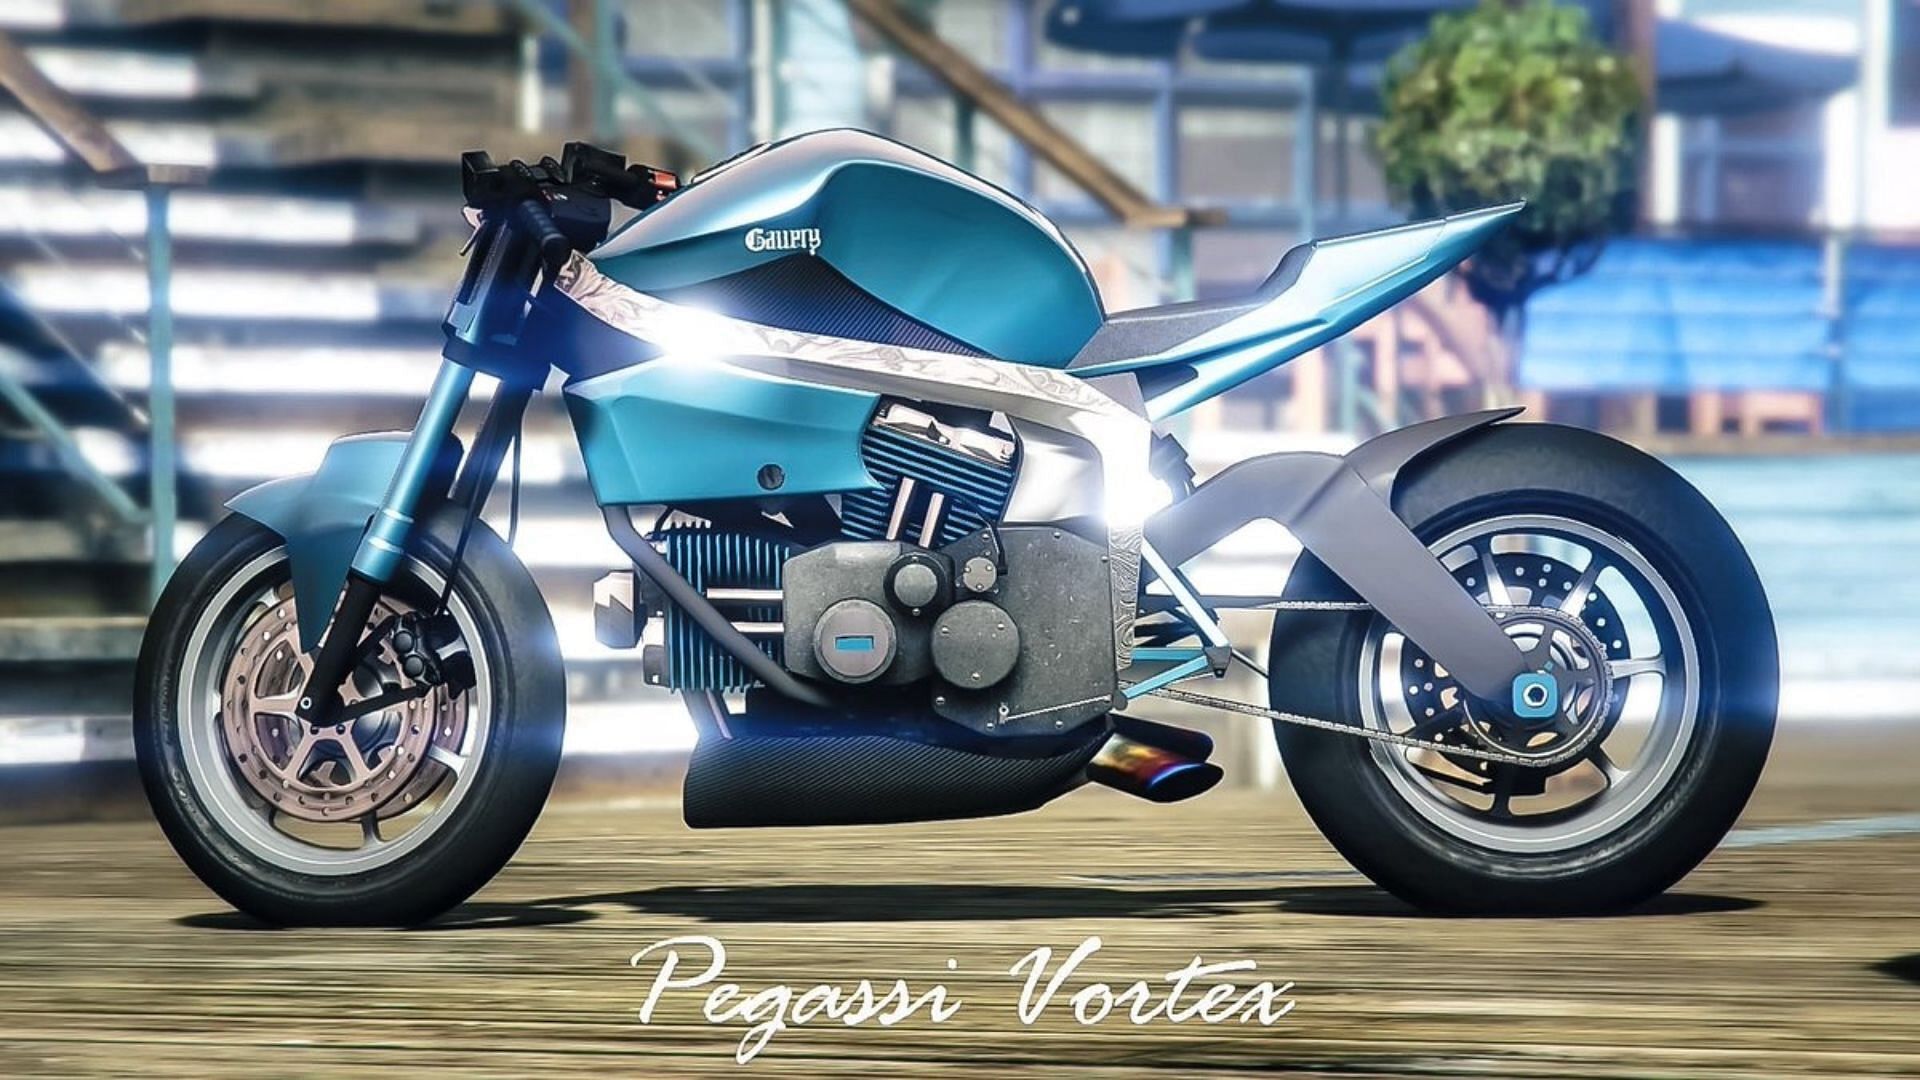 The Pegassi Vortex is available at a 50% discount this week in GTA Online (Image via @Basimatic1227/Rockstar Games)